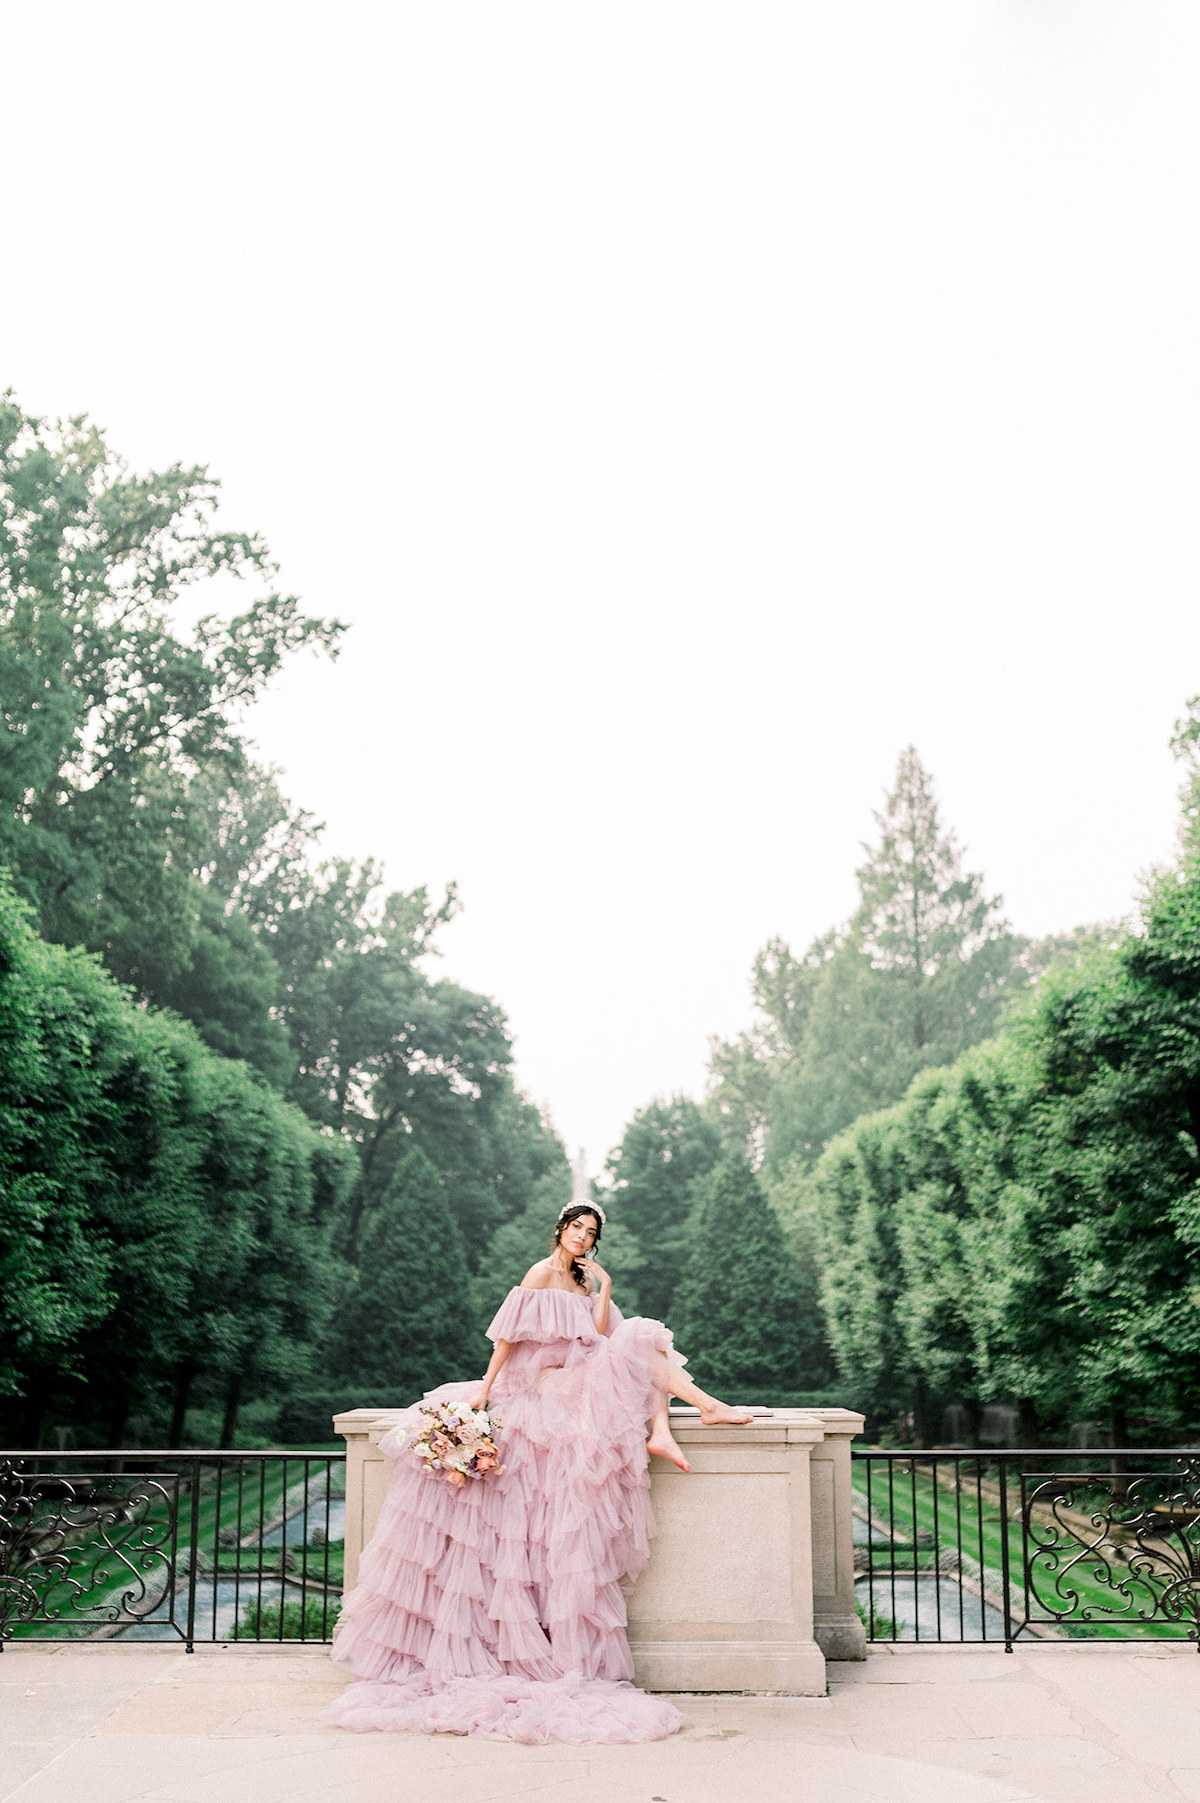 The couture gown transforms Karla into a vision of high-fashion chic, her commanding pose against the natural beauty of Longwood Gardens creating a captivating contrast.